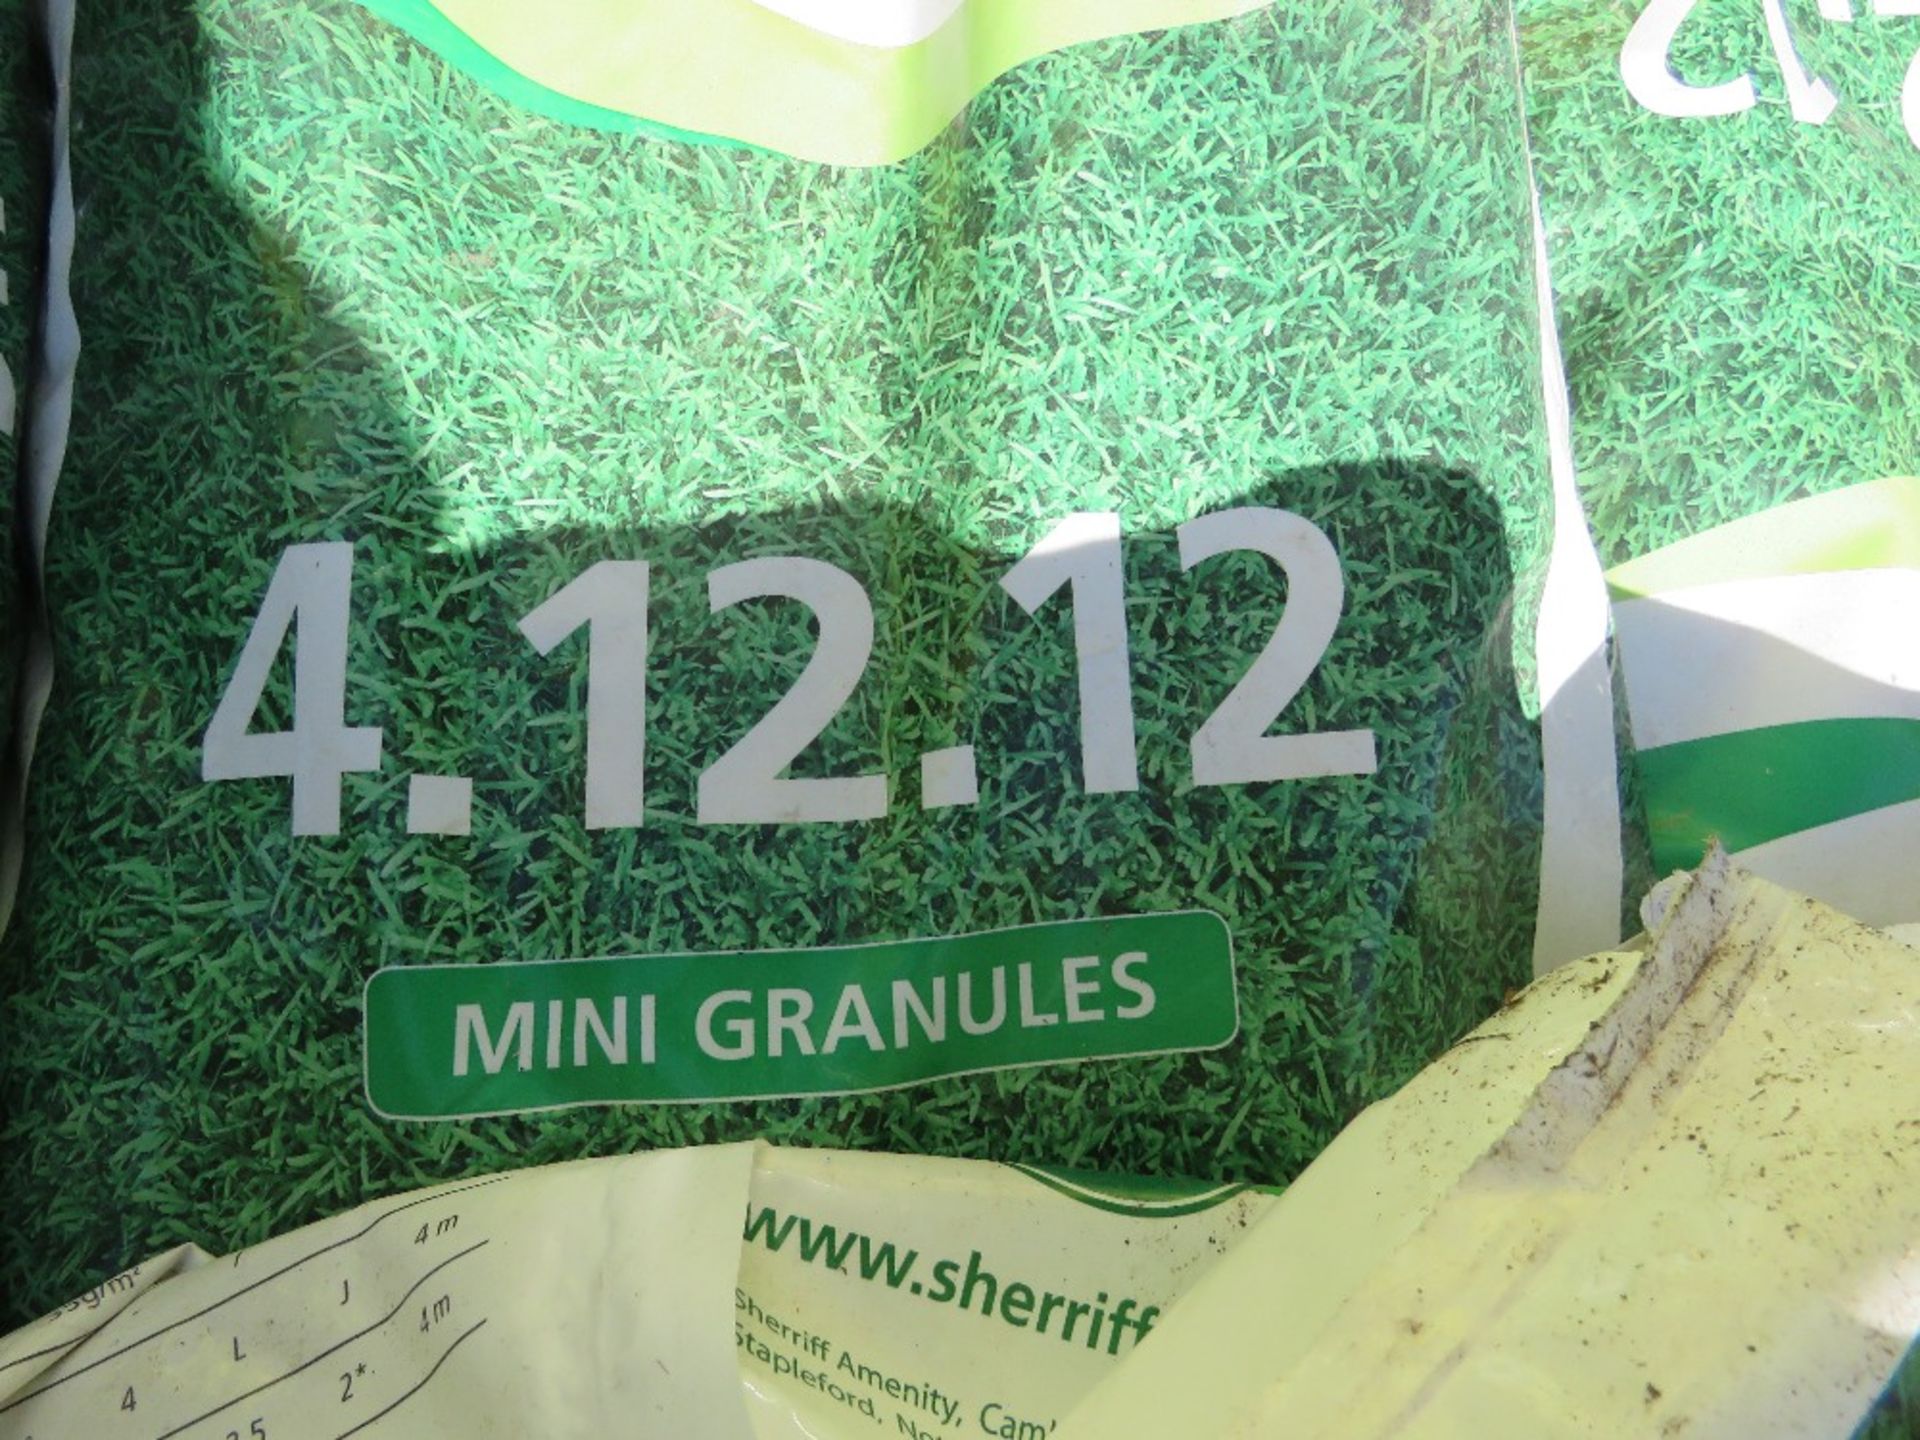 5NO BAGS OF 9.7.7 FERTILISER. DIRECT FROM LOCAL LANDSCAPE COMPANY WHO ARE CLOSING A DEPOT. - Image 3 of 4